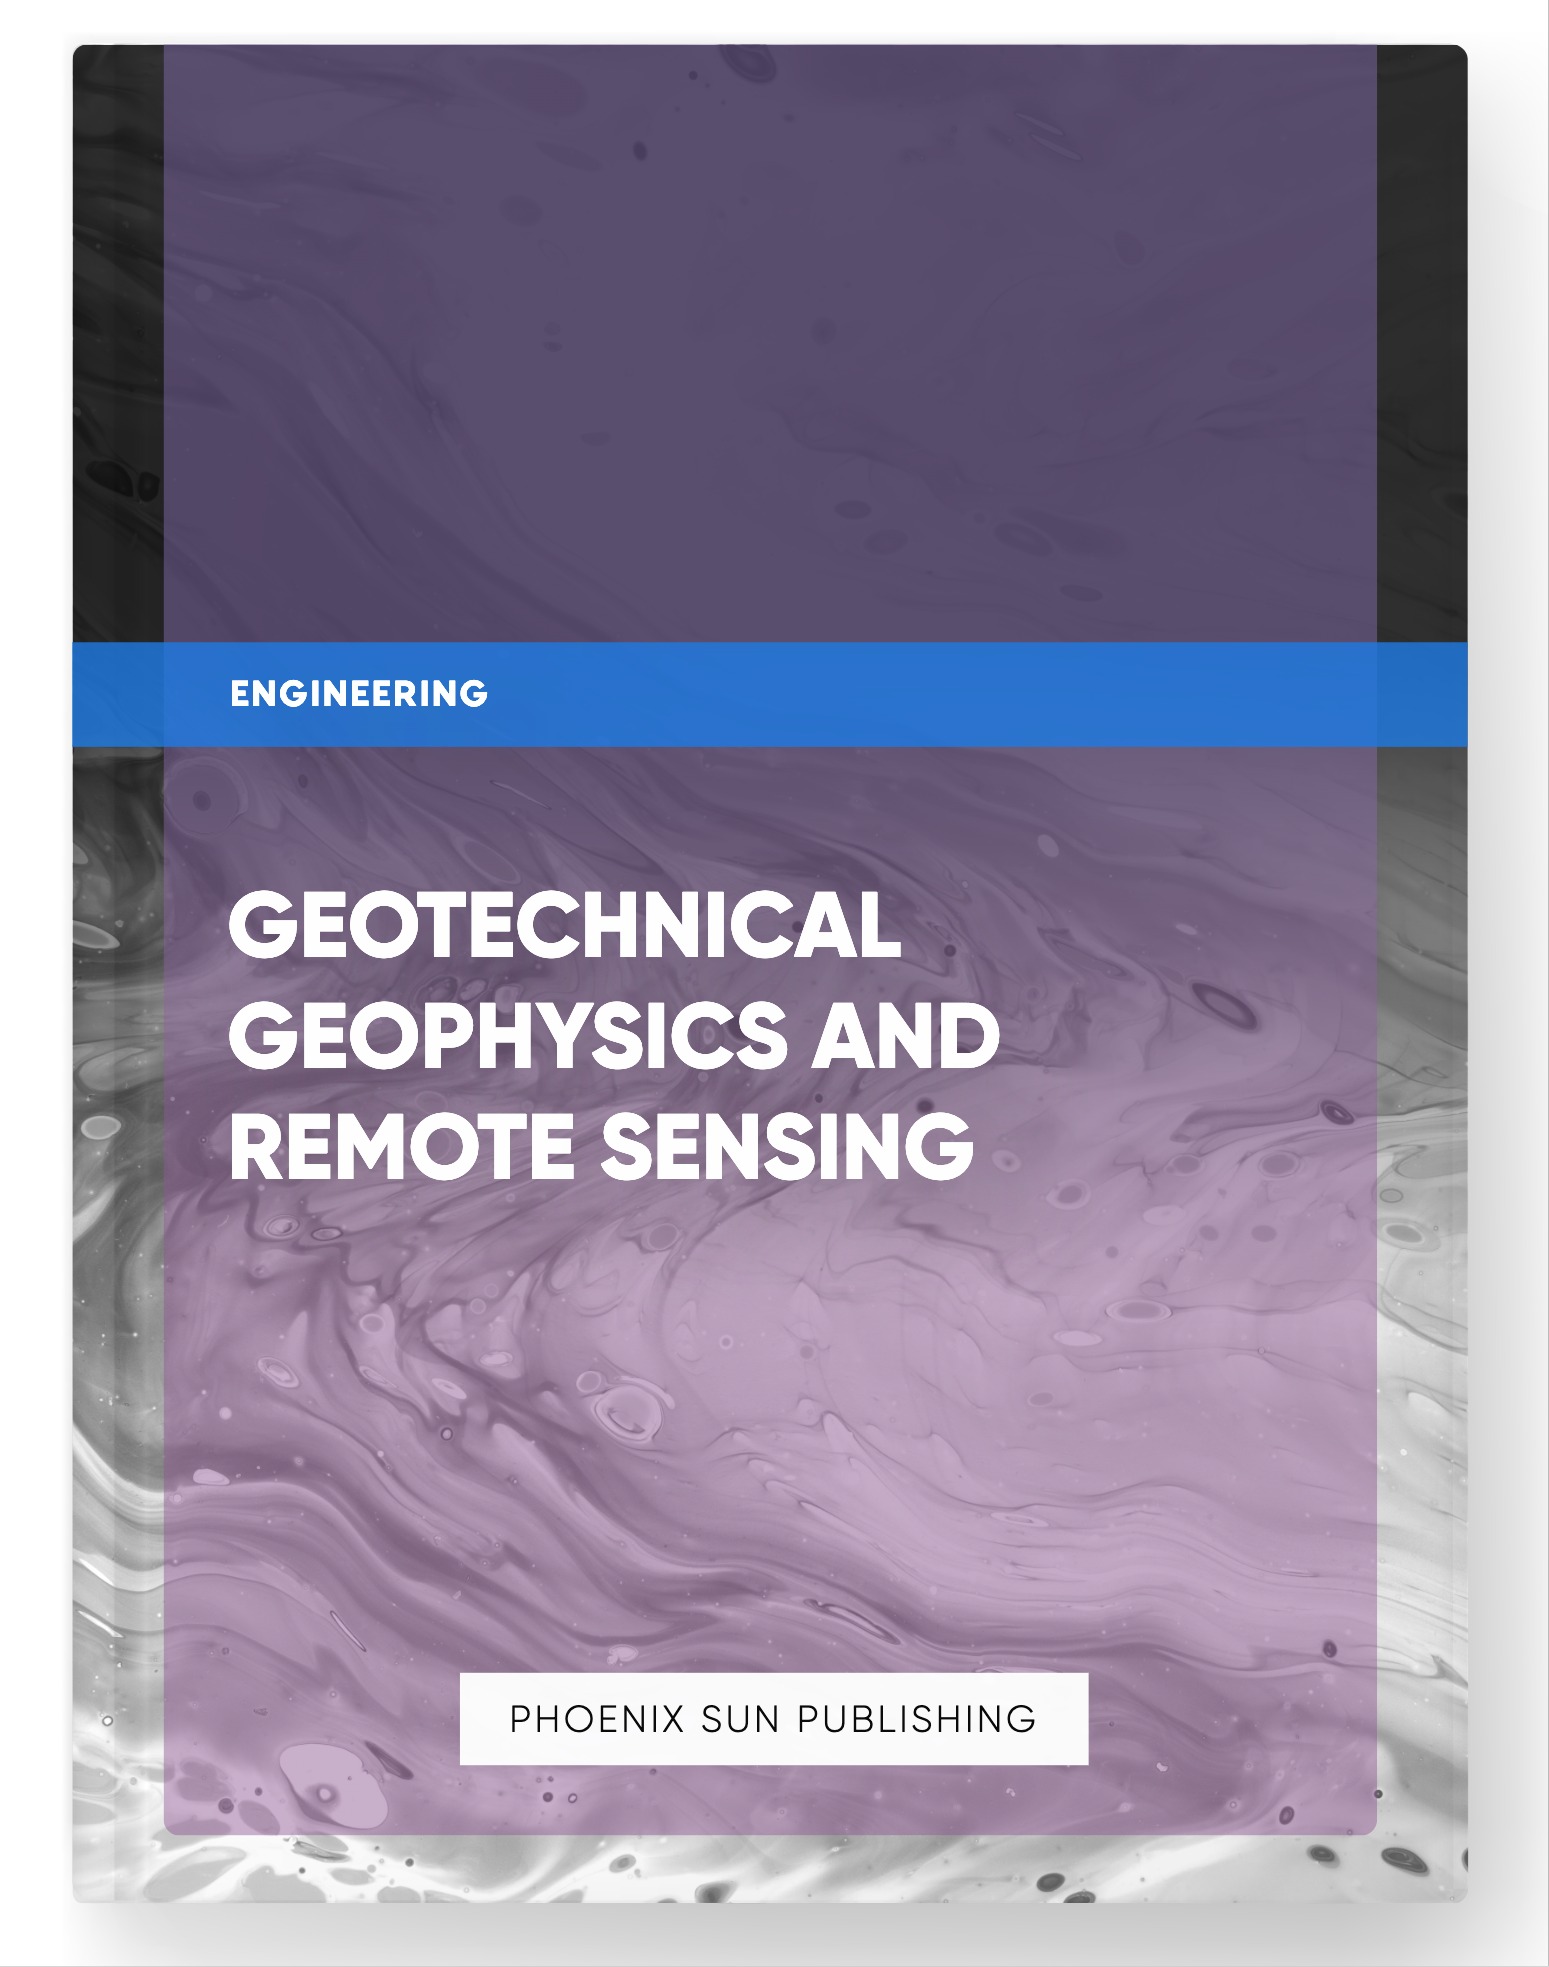 Geotechnical Geophysics and Remote Sensing